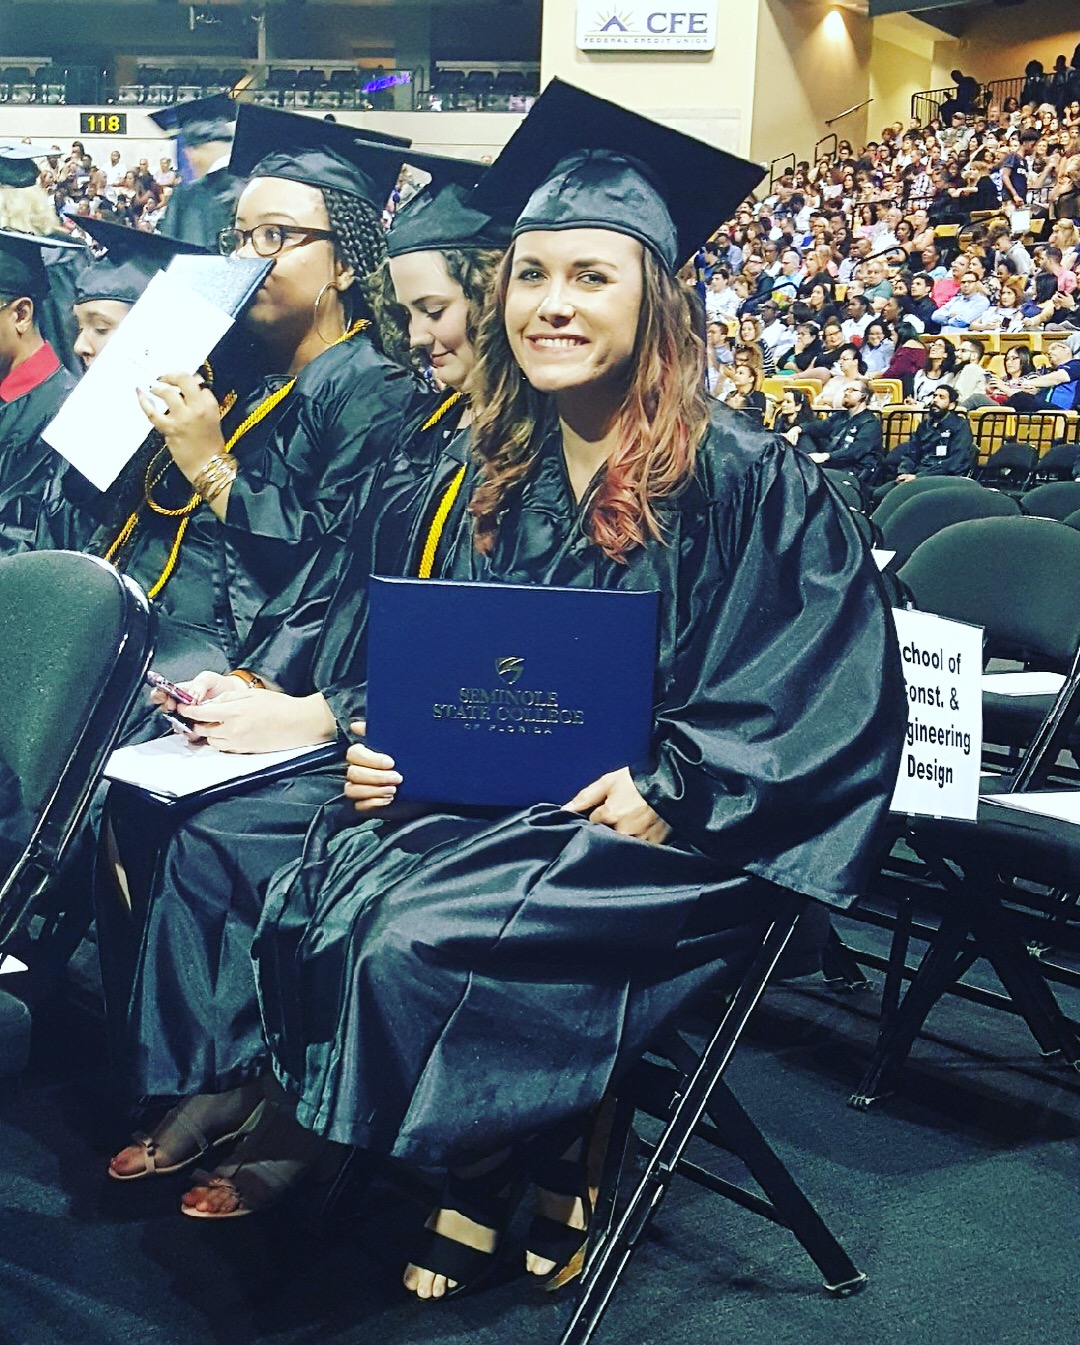 Danielle Head sitting down in graduation gown, smiling and holding diploma.